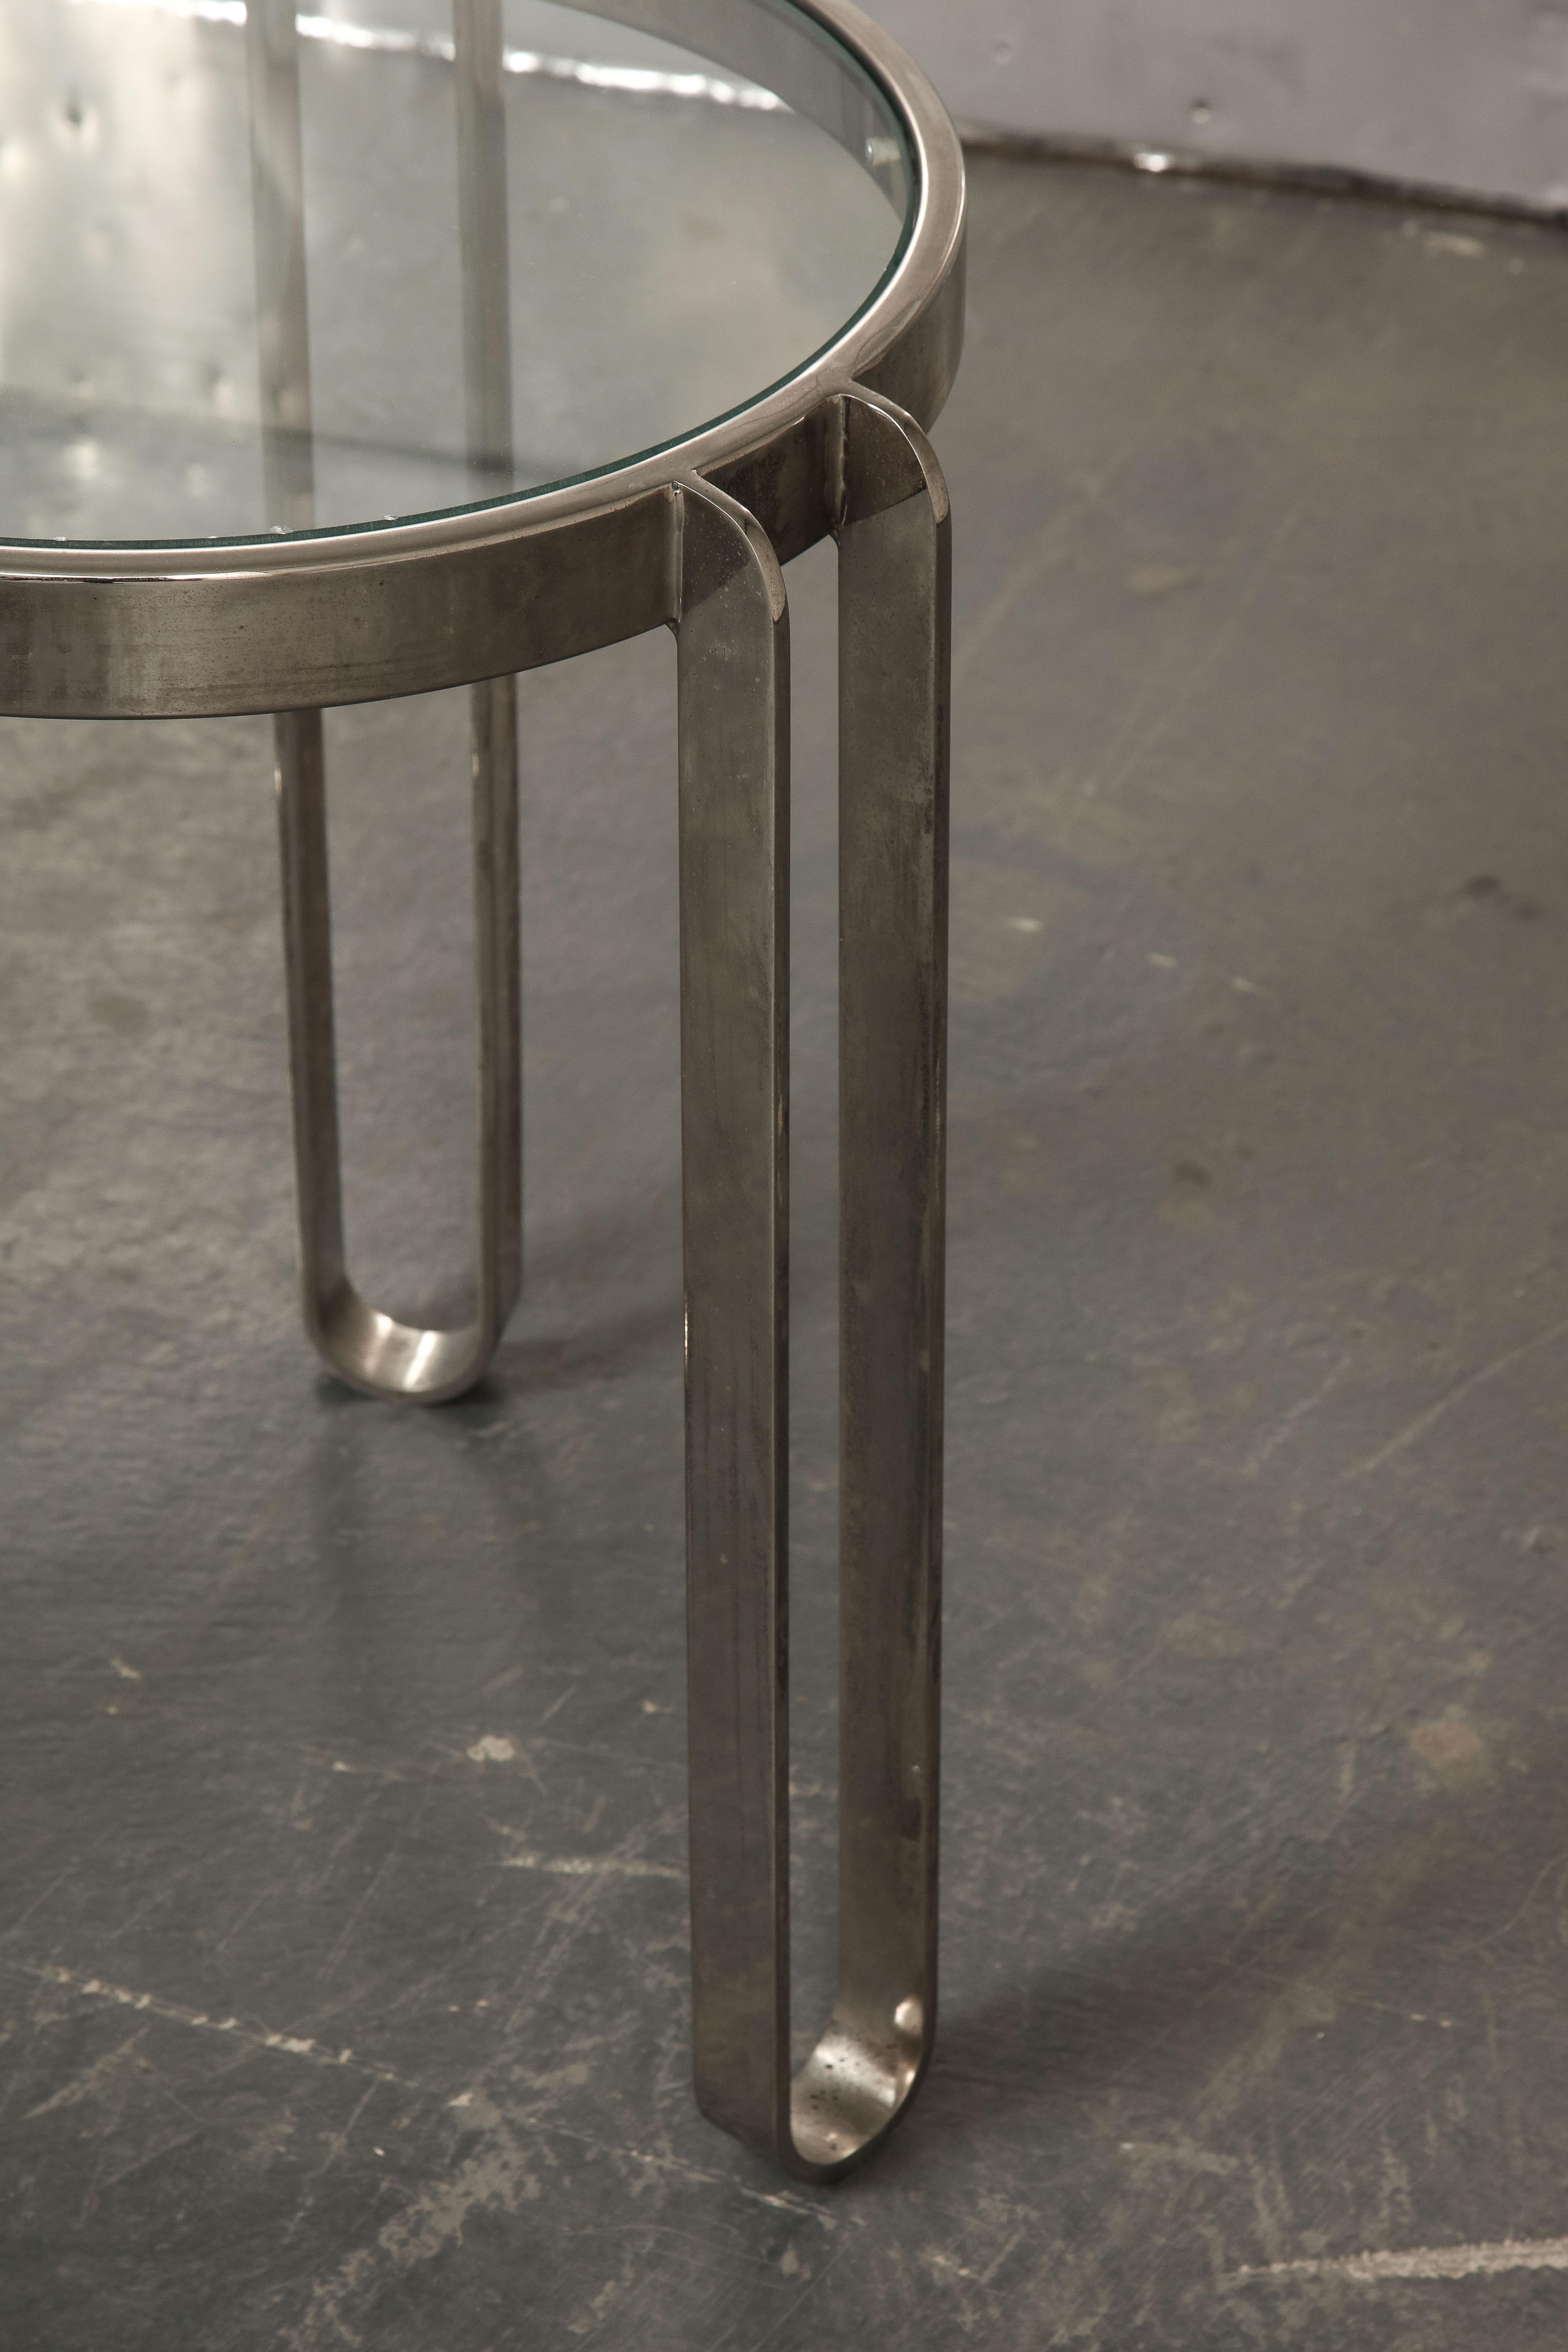 The nickel frame with three legs inset with a round glass top.